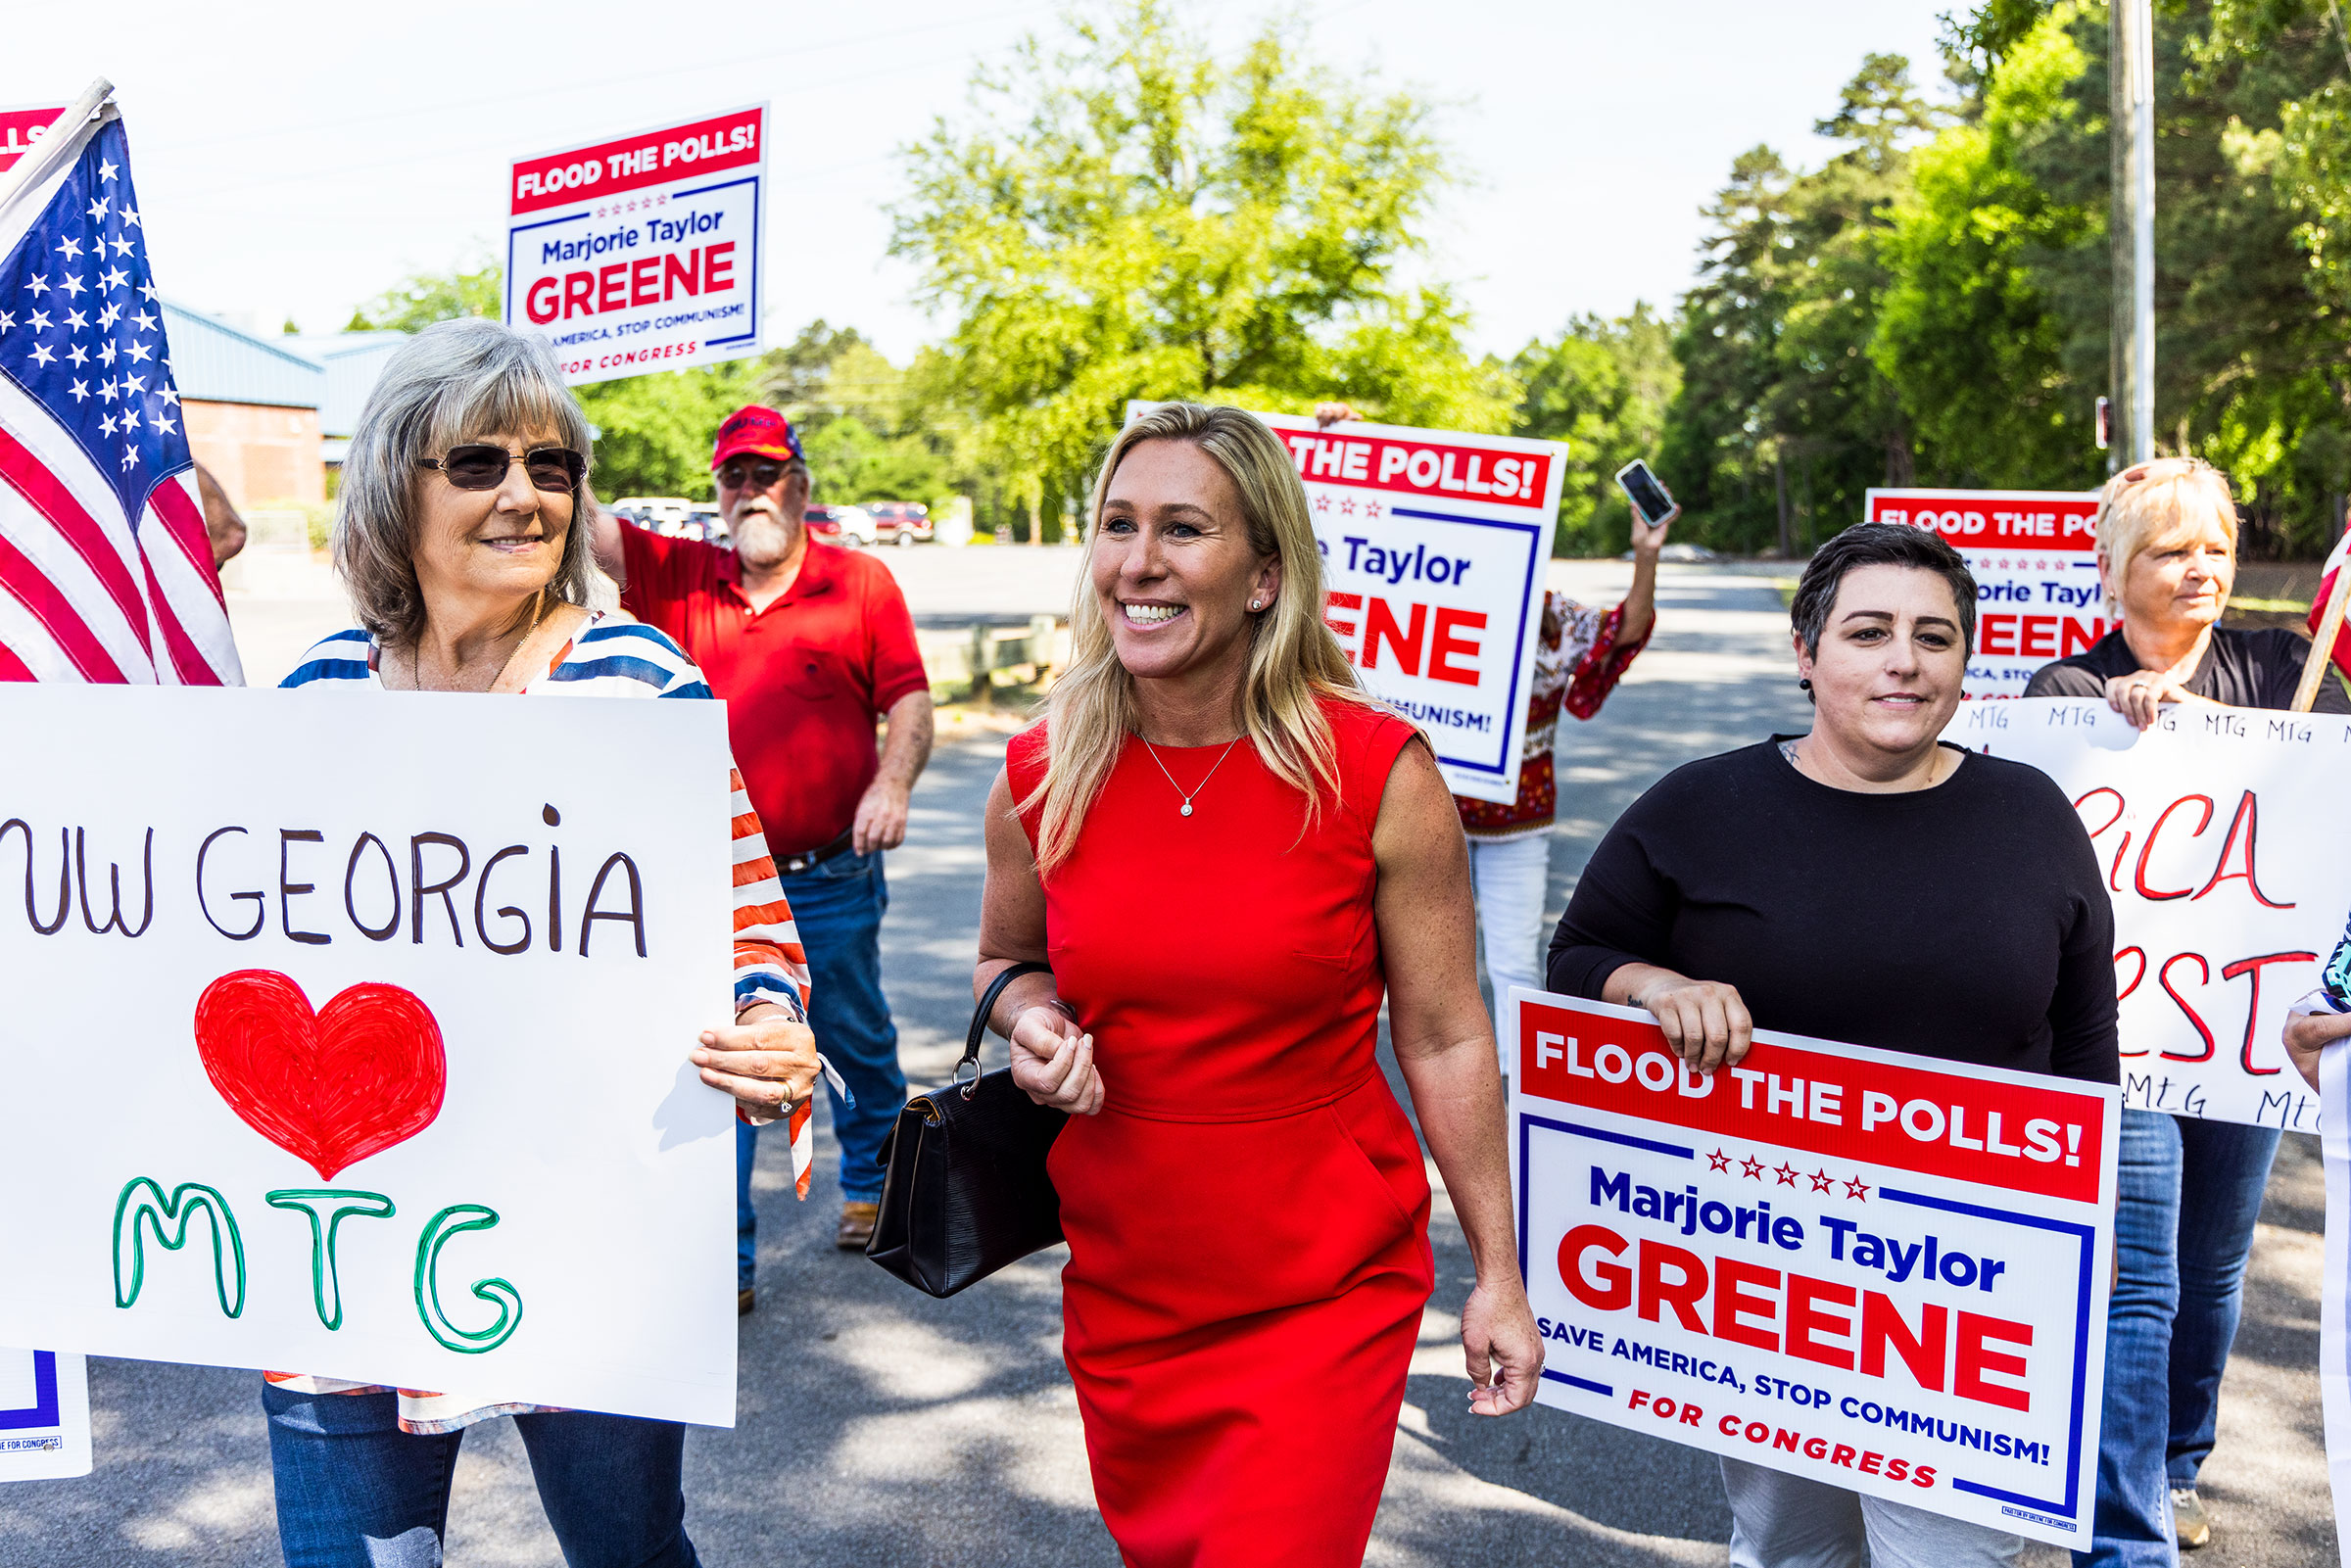 Marjorie Taylor Greene walks with supporters to cast her primary ballot in Rome, Ga., on the first day of early voting. (Andrew Hetherington for TIME)